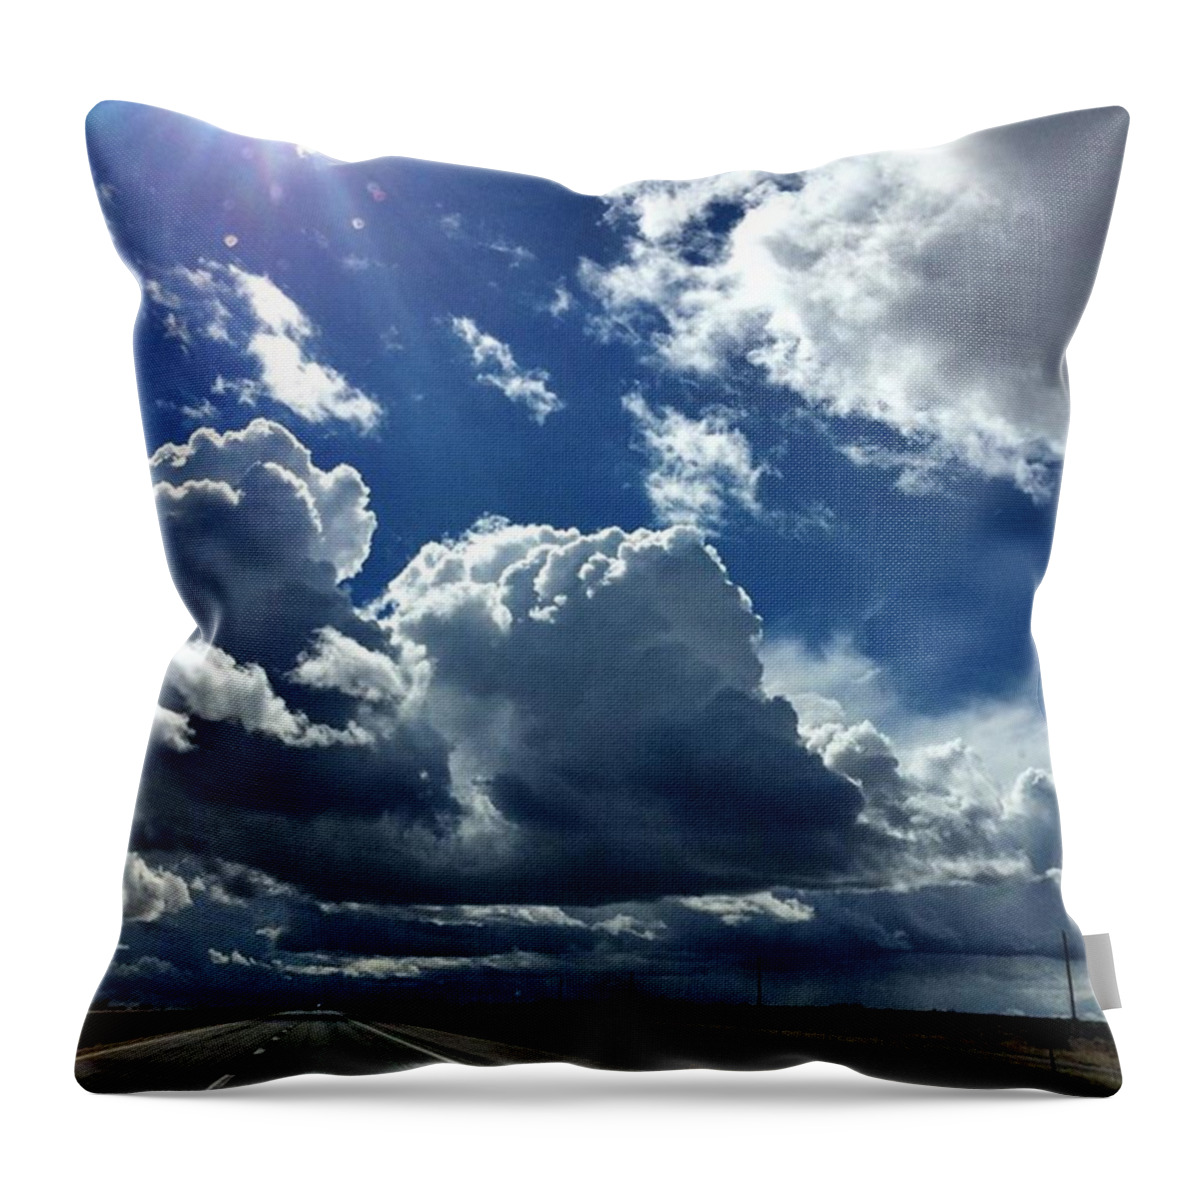 Clouds Throw Pillow featuring the photograph Rain Clouds by Star Rodriguez